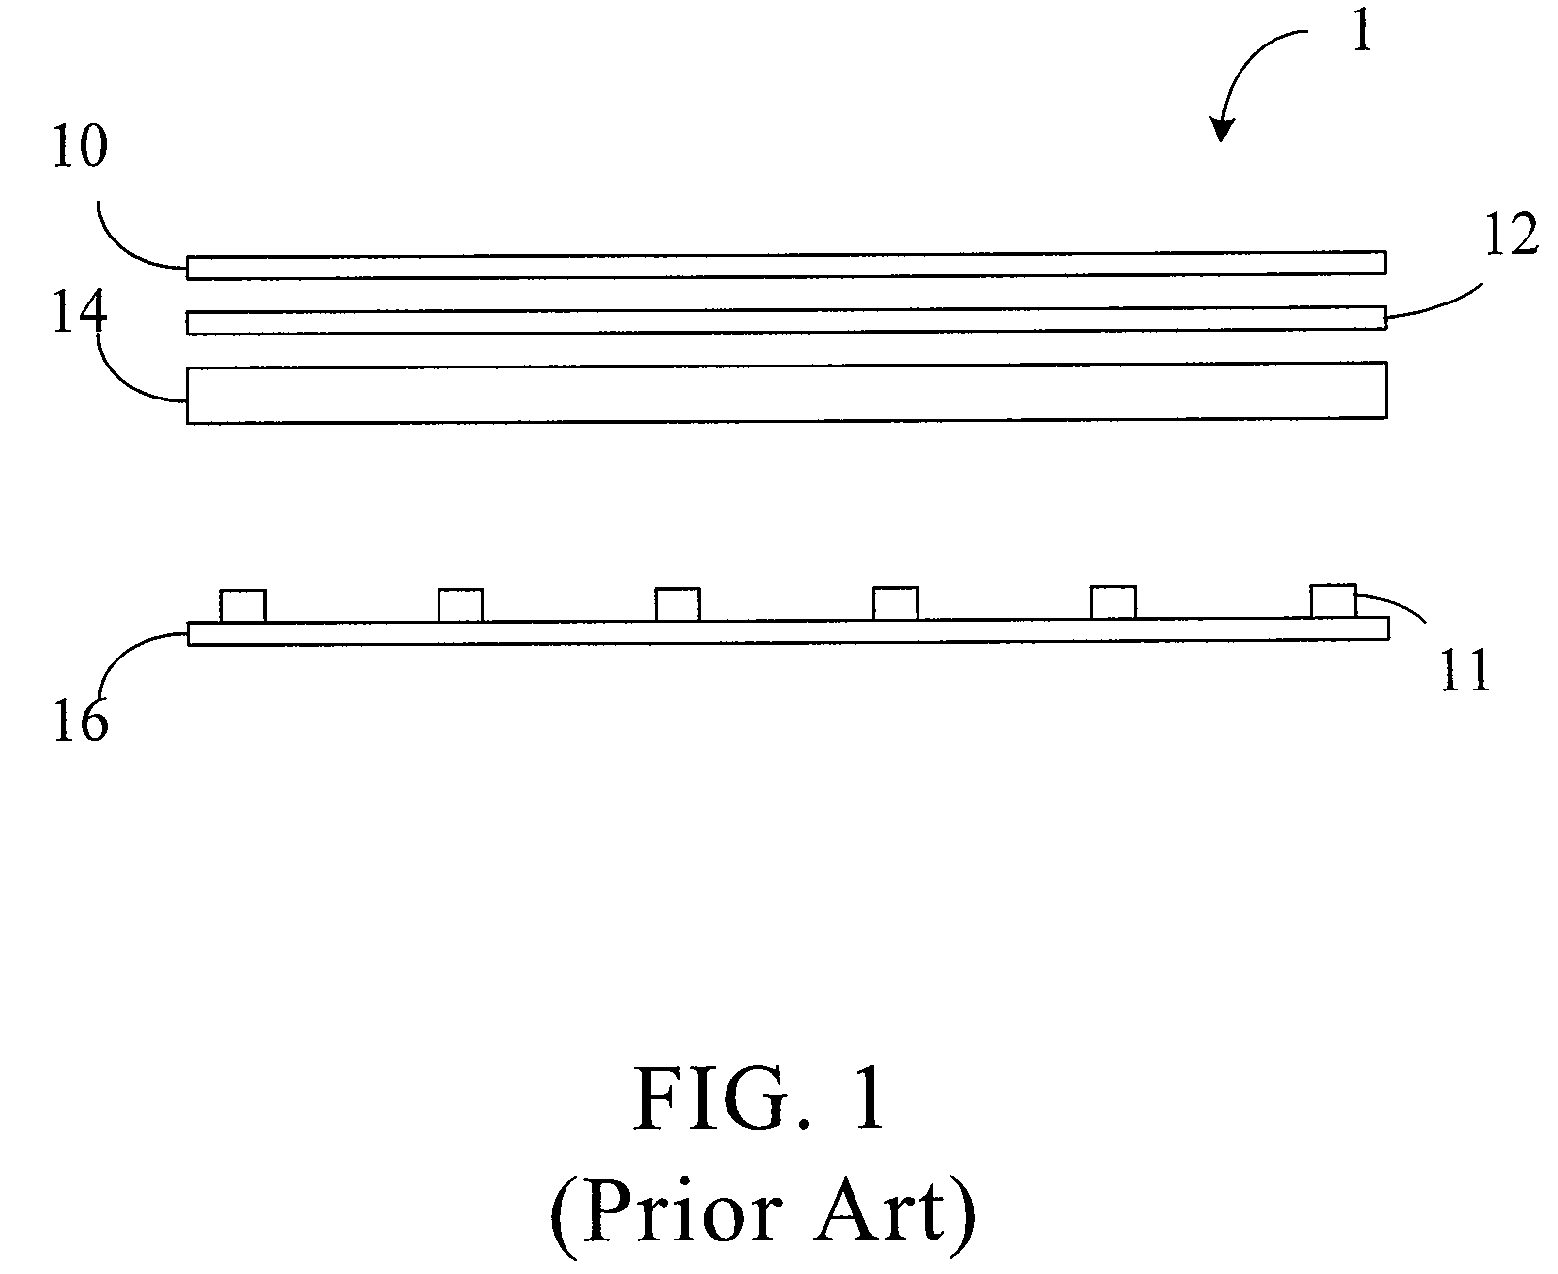 Backlight module and scattering module for same